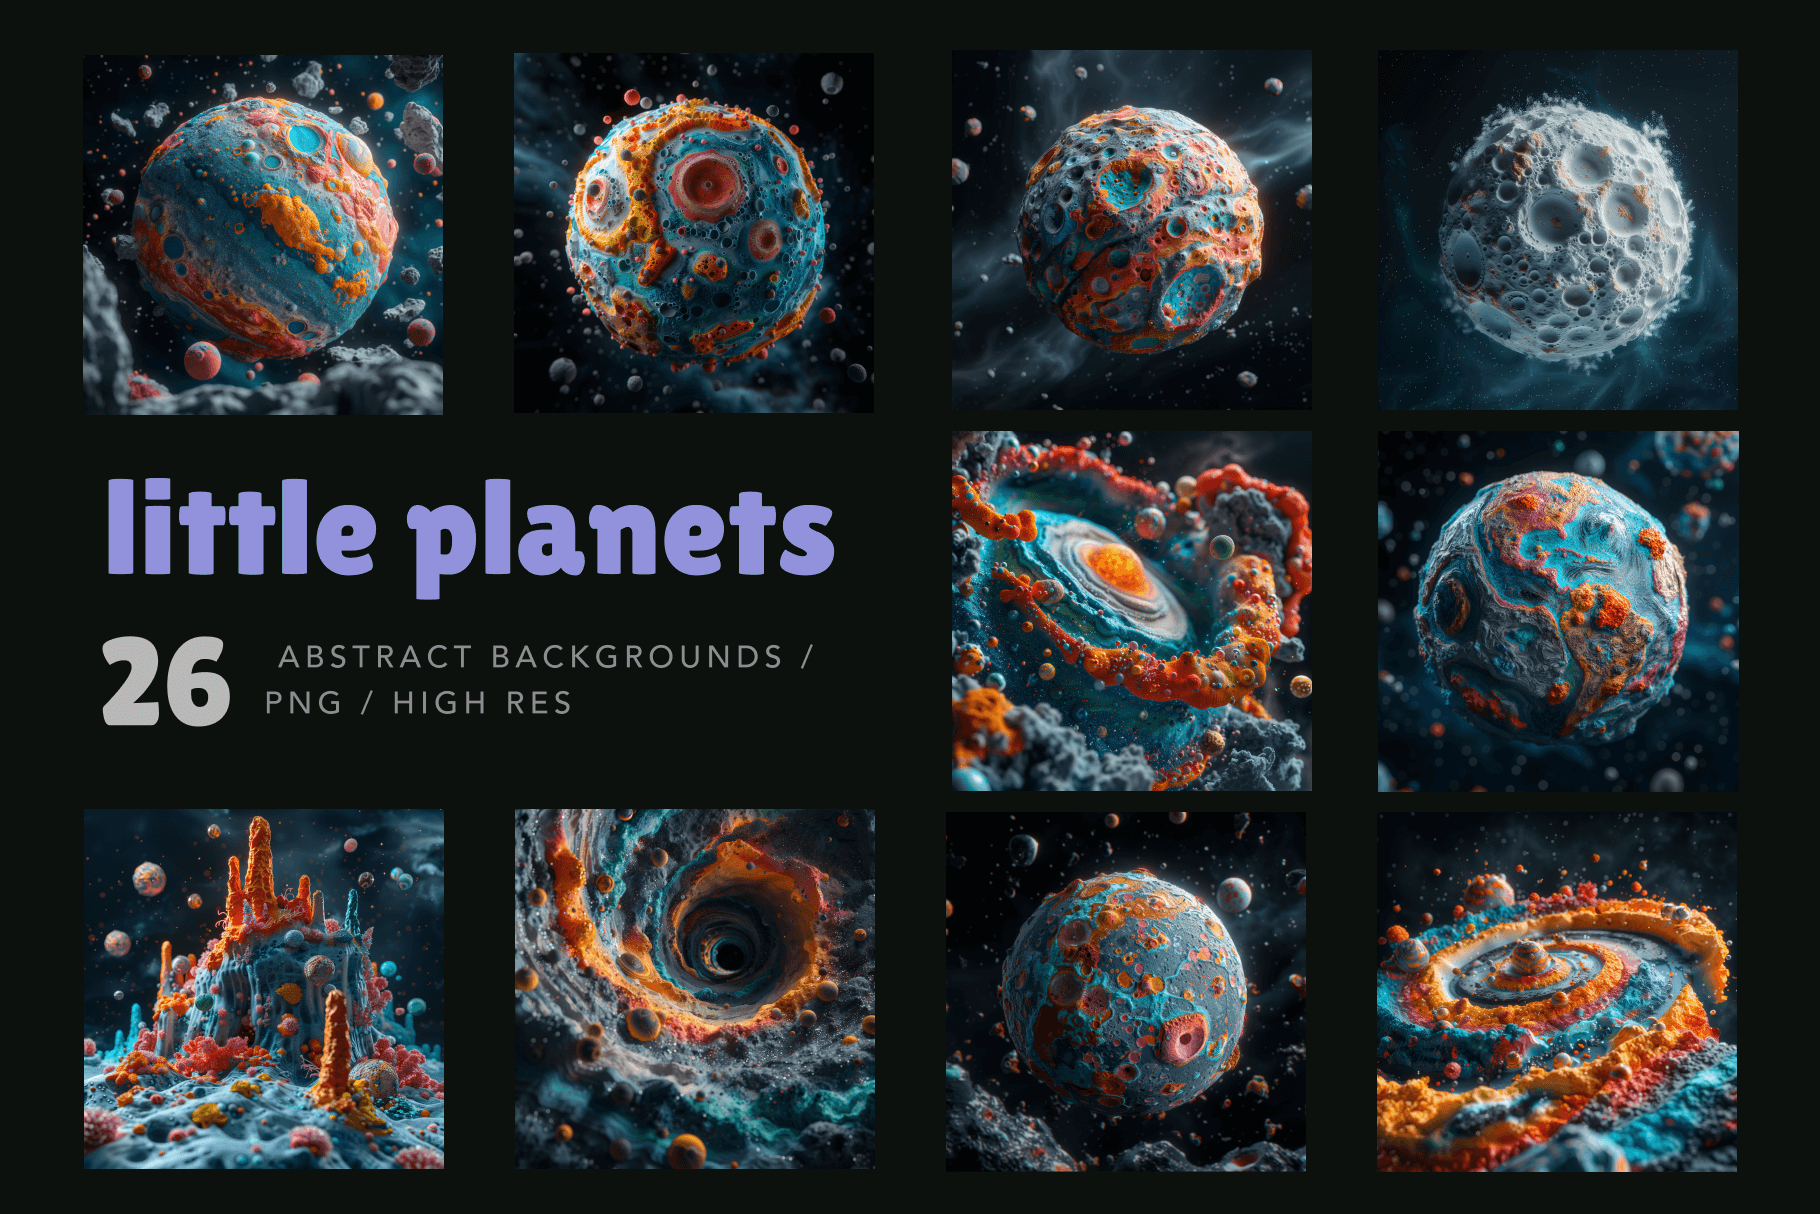 A beautiful series of whimsical 3D planet images